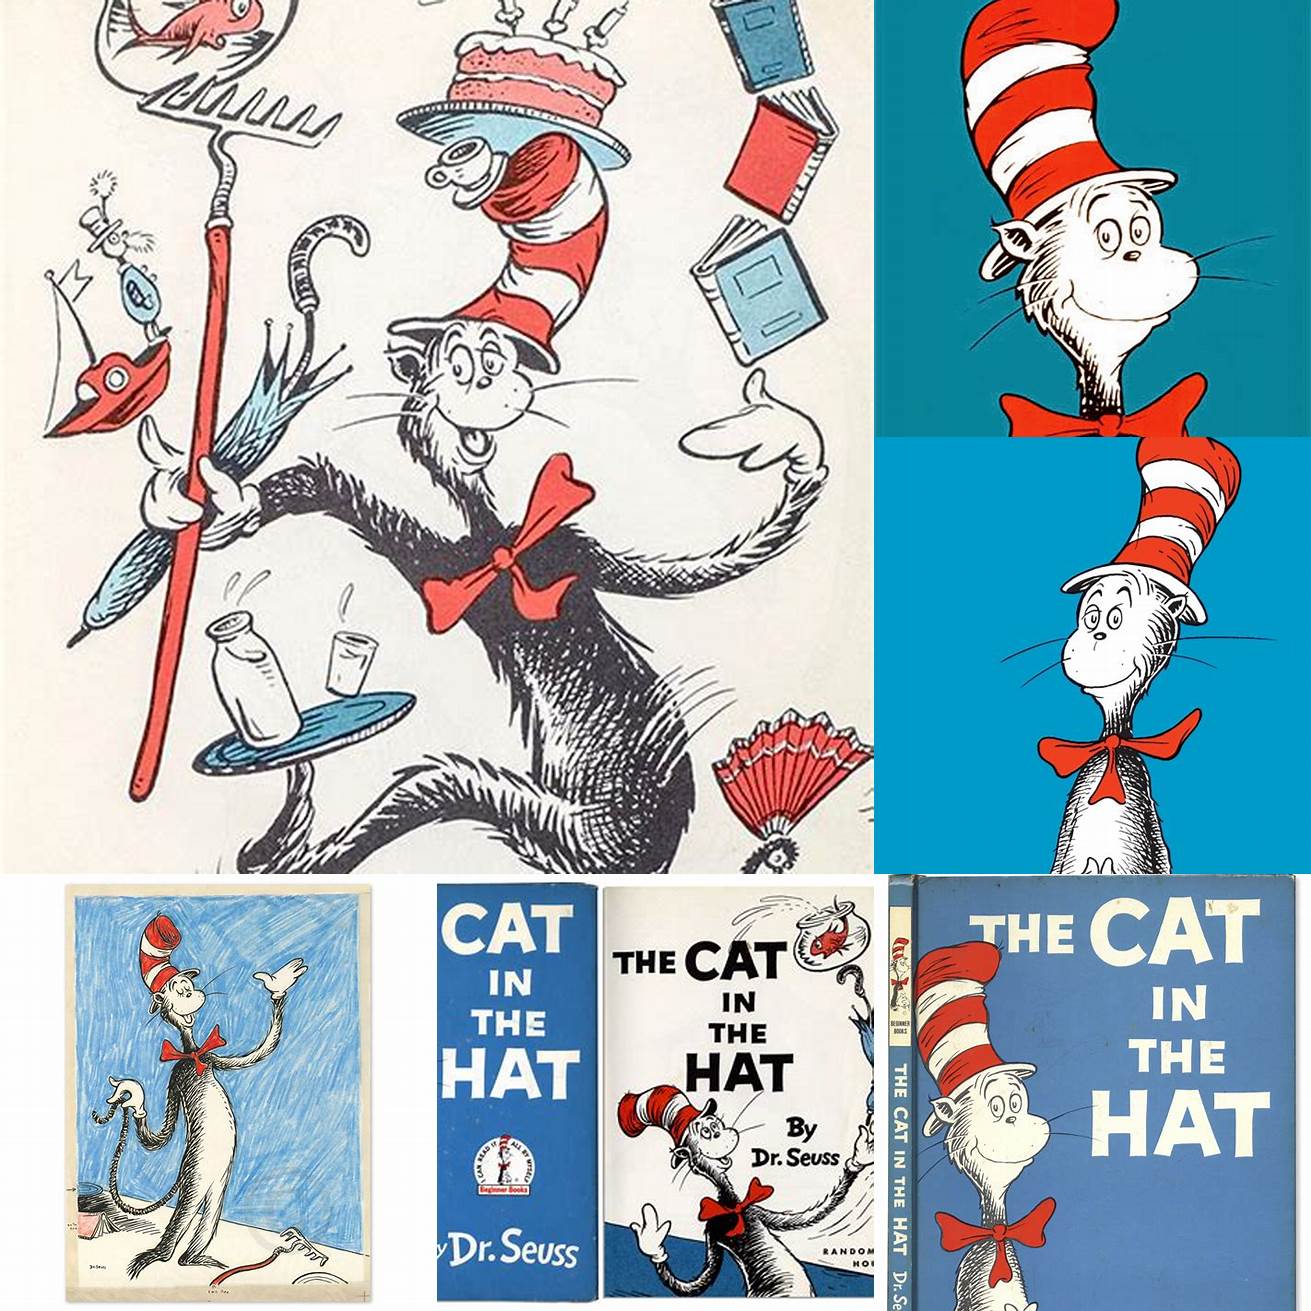 Illustrations by Dr Seuss